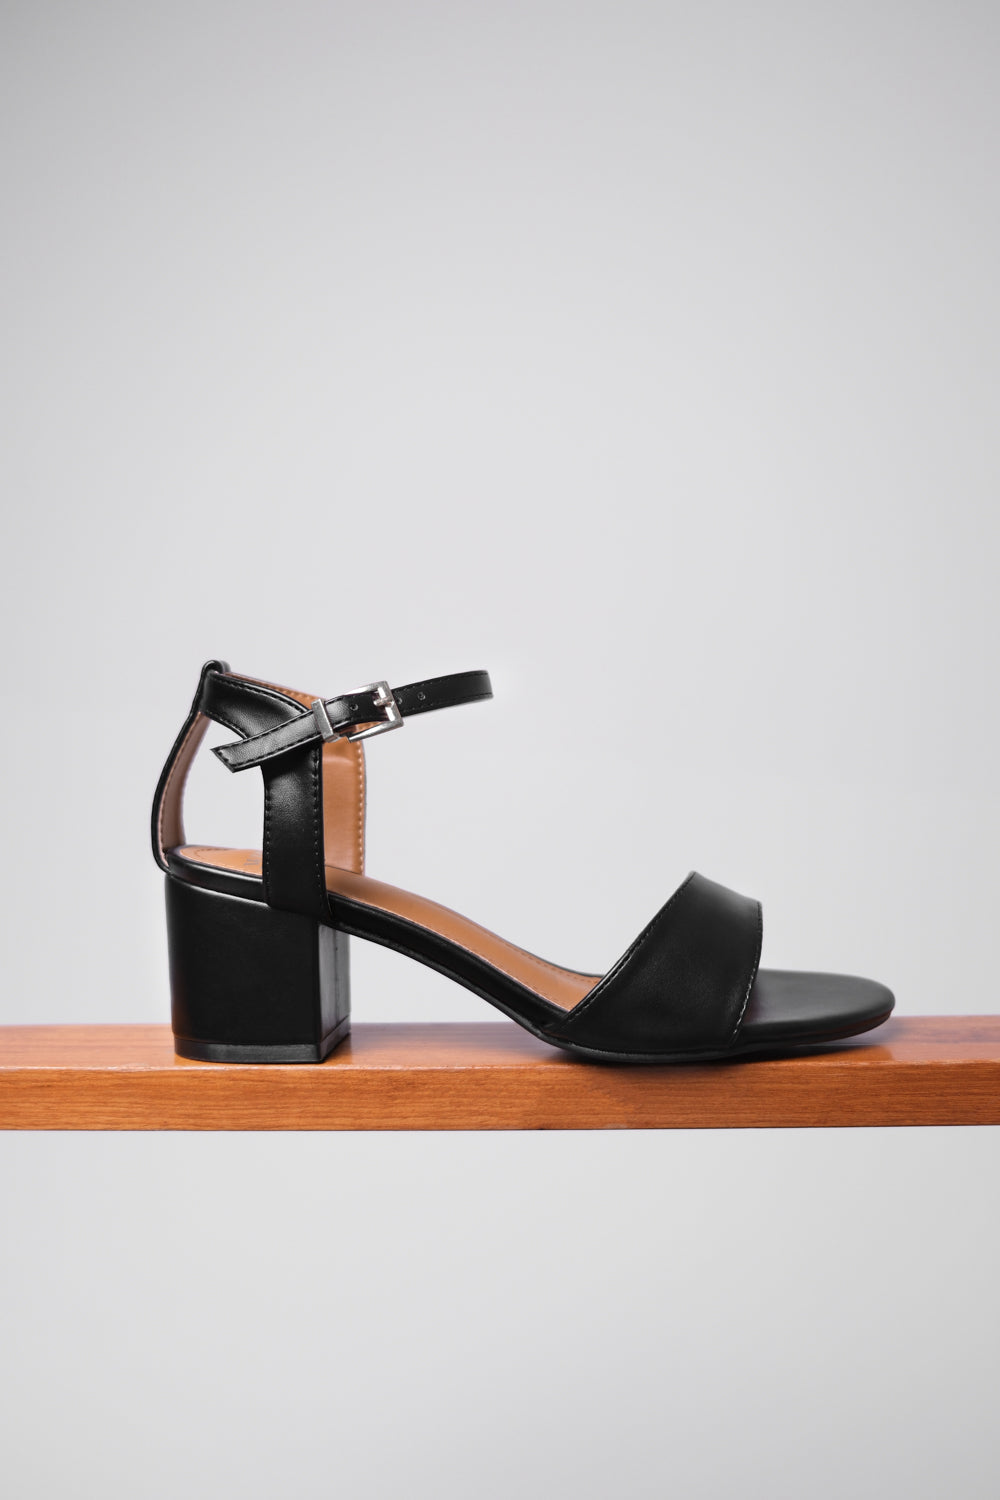 ADRIANNA WIDE FIT STRAPPY MID HIGH BLOCK HEELS OPEN TOE IN BLACK FAUX LEATHER